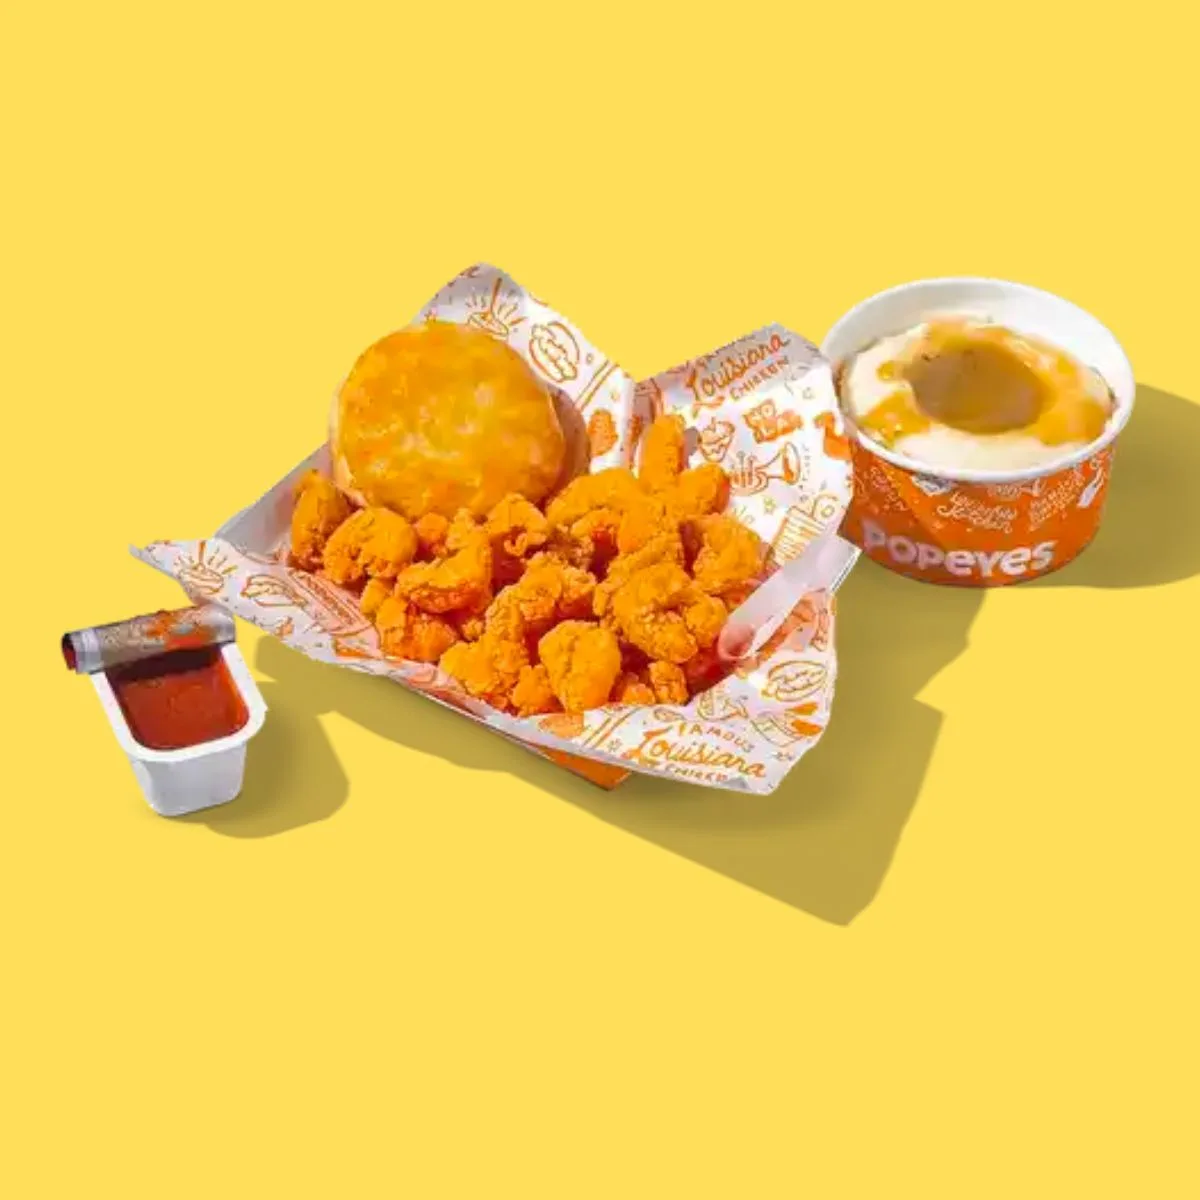 popeyes sauces with fried shrimp